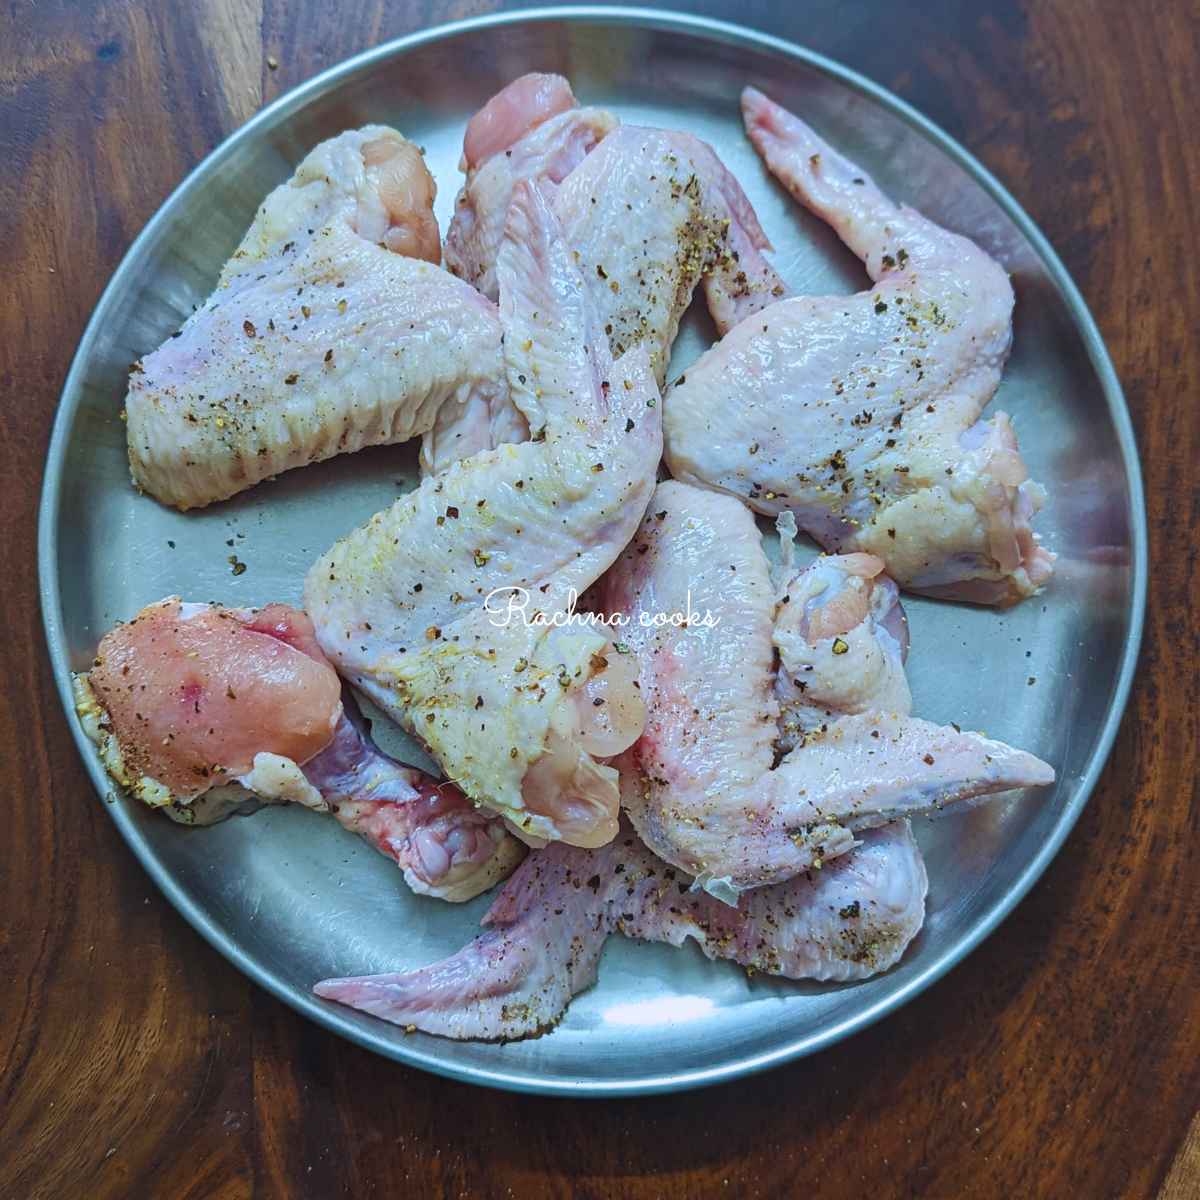 Salt and pepper on chicken wings